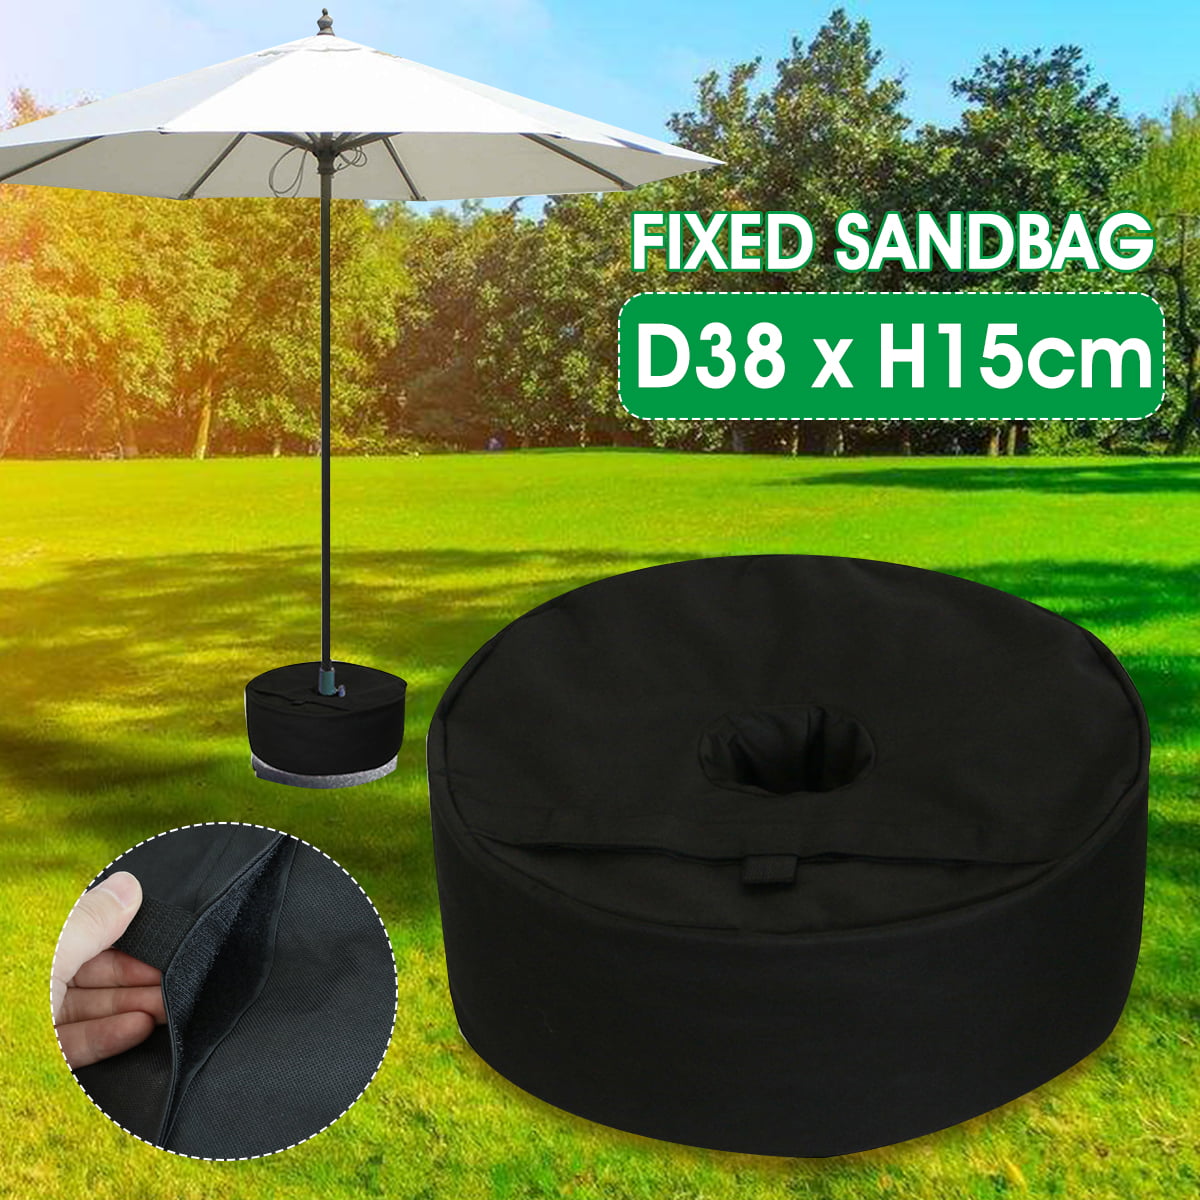 ABCCANOPY Diameter 14 Parasol Sunshade Umbrella Base Weight Bag Sand Bag with Two Handle for Easy Carry Black 